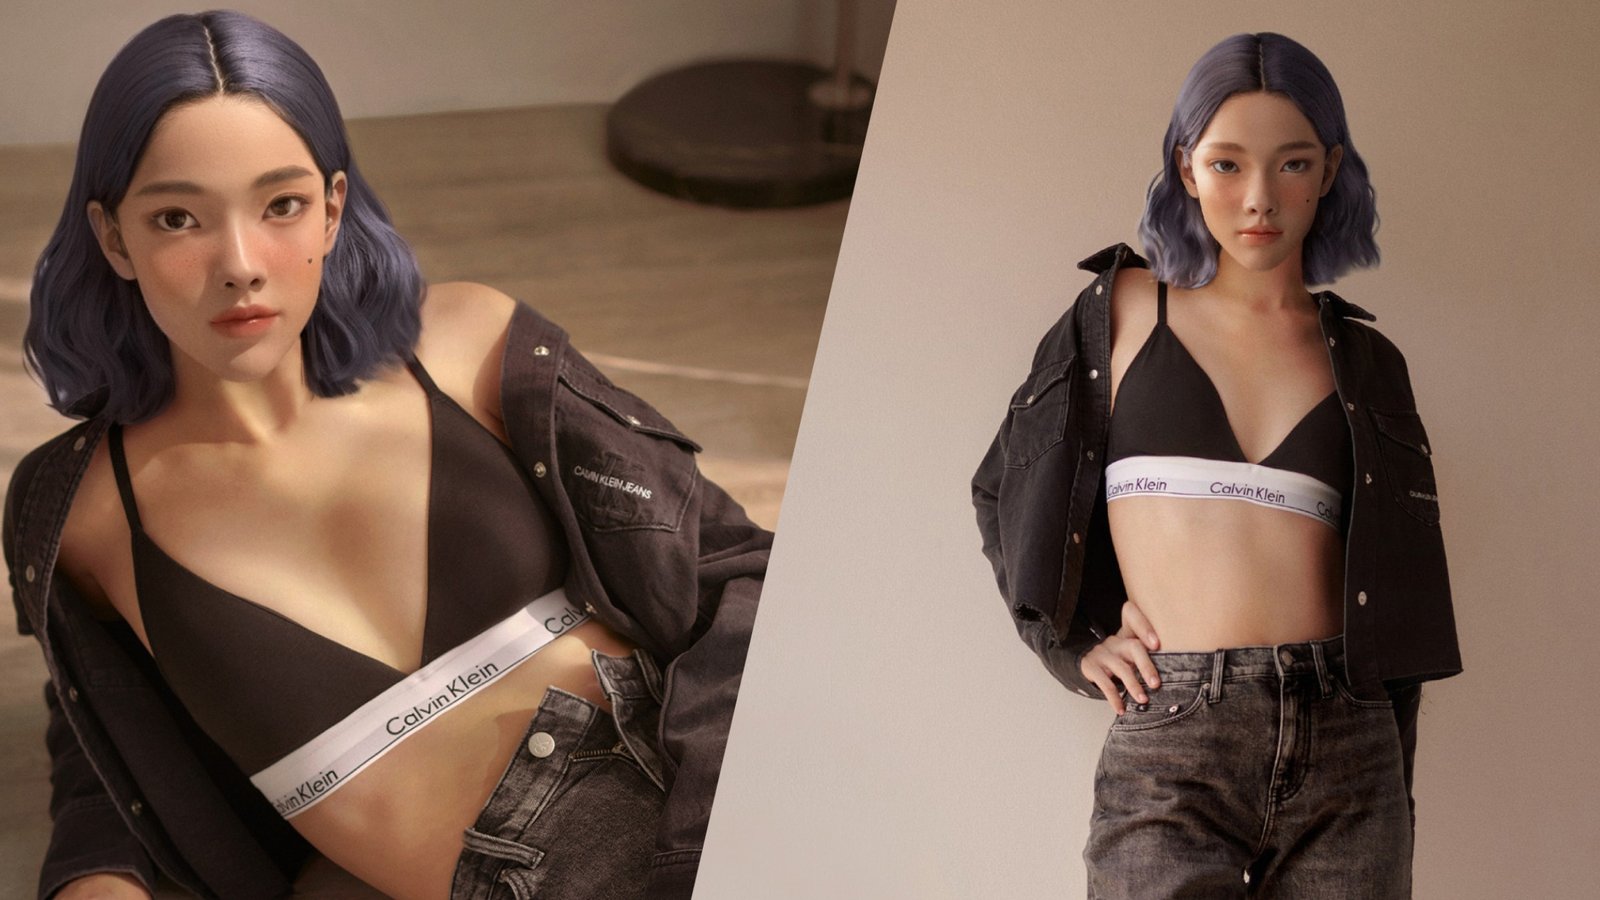 Calvin Klein Partners with Virtual Influencer Katii
